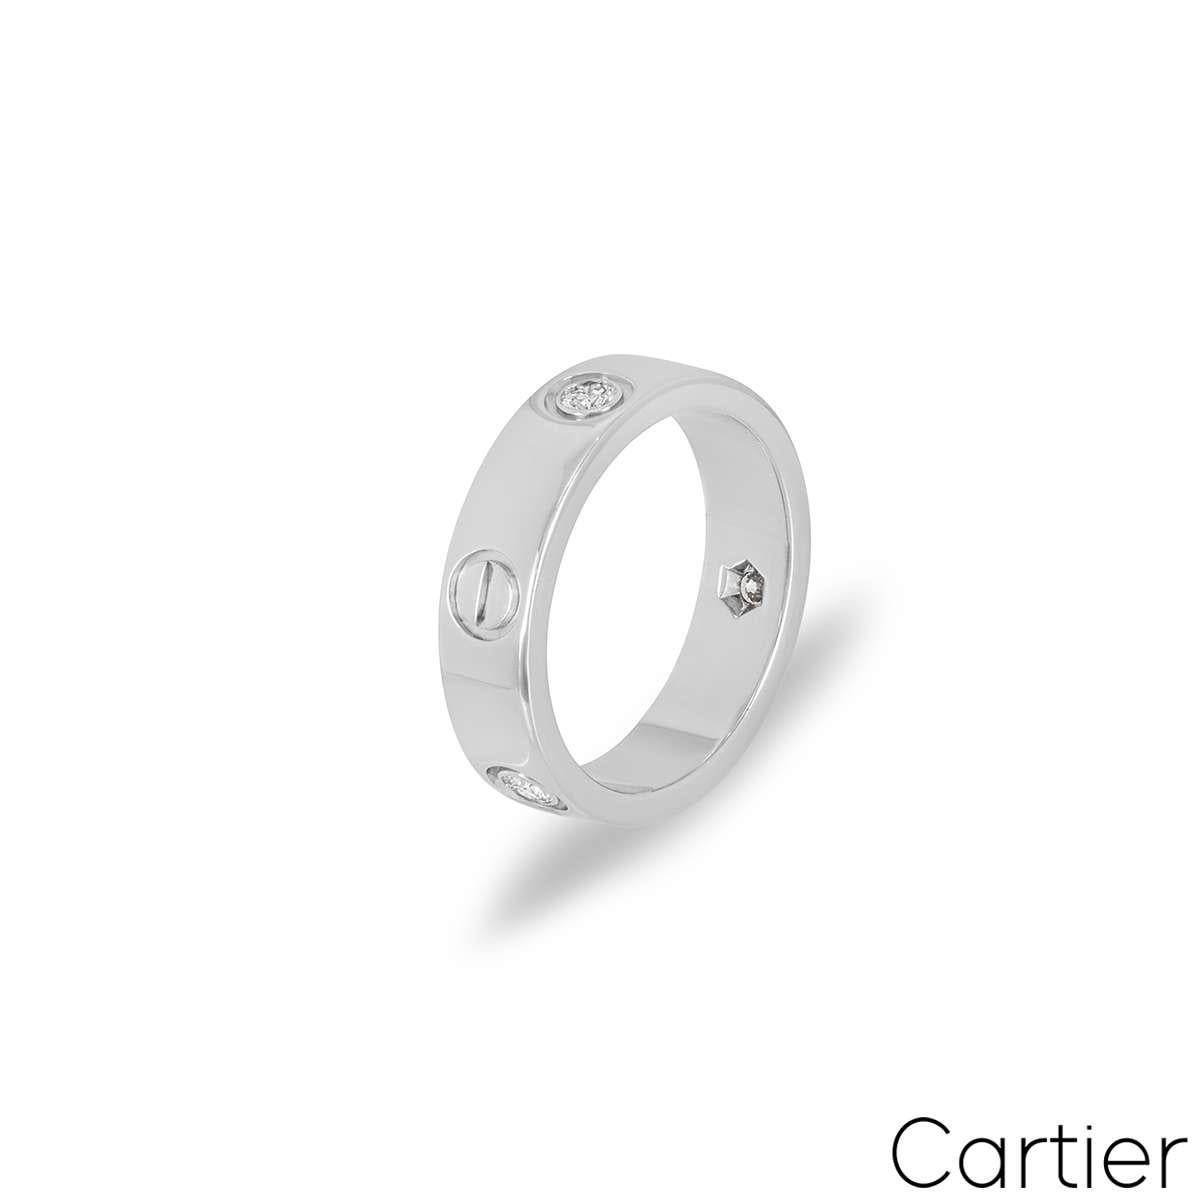 A signature 18k white gold ring from the Love collection by Cartier. Set with 3 round brilliant cut diamonds totalling 0.22ct, alternating between the iconic Cartier screw motifs. 5.5mm wide, the ring is a size UK M - EU 52 and has a gross weight of